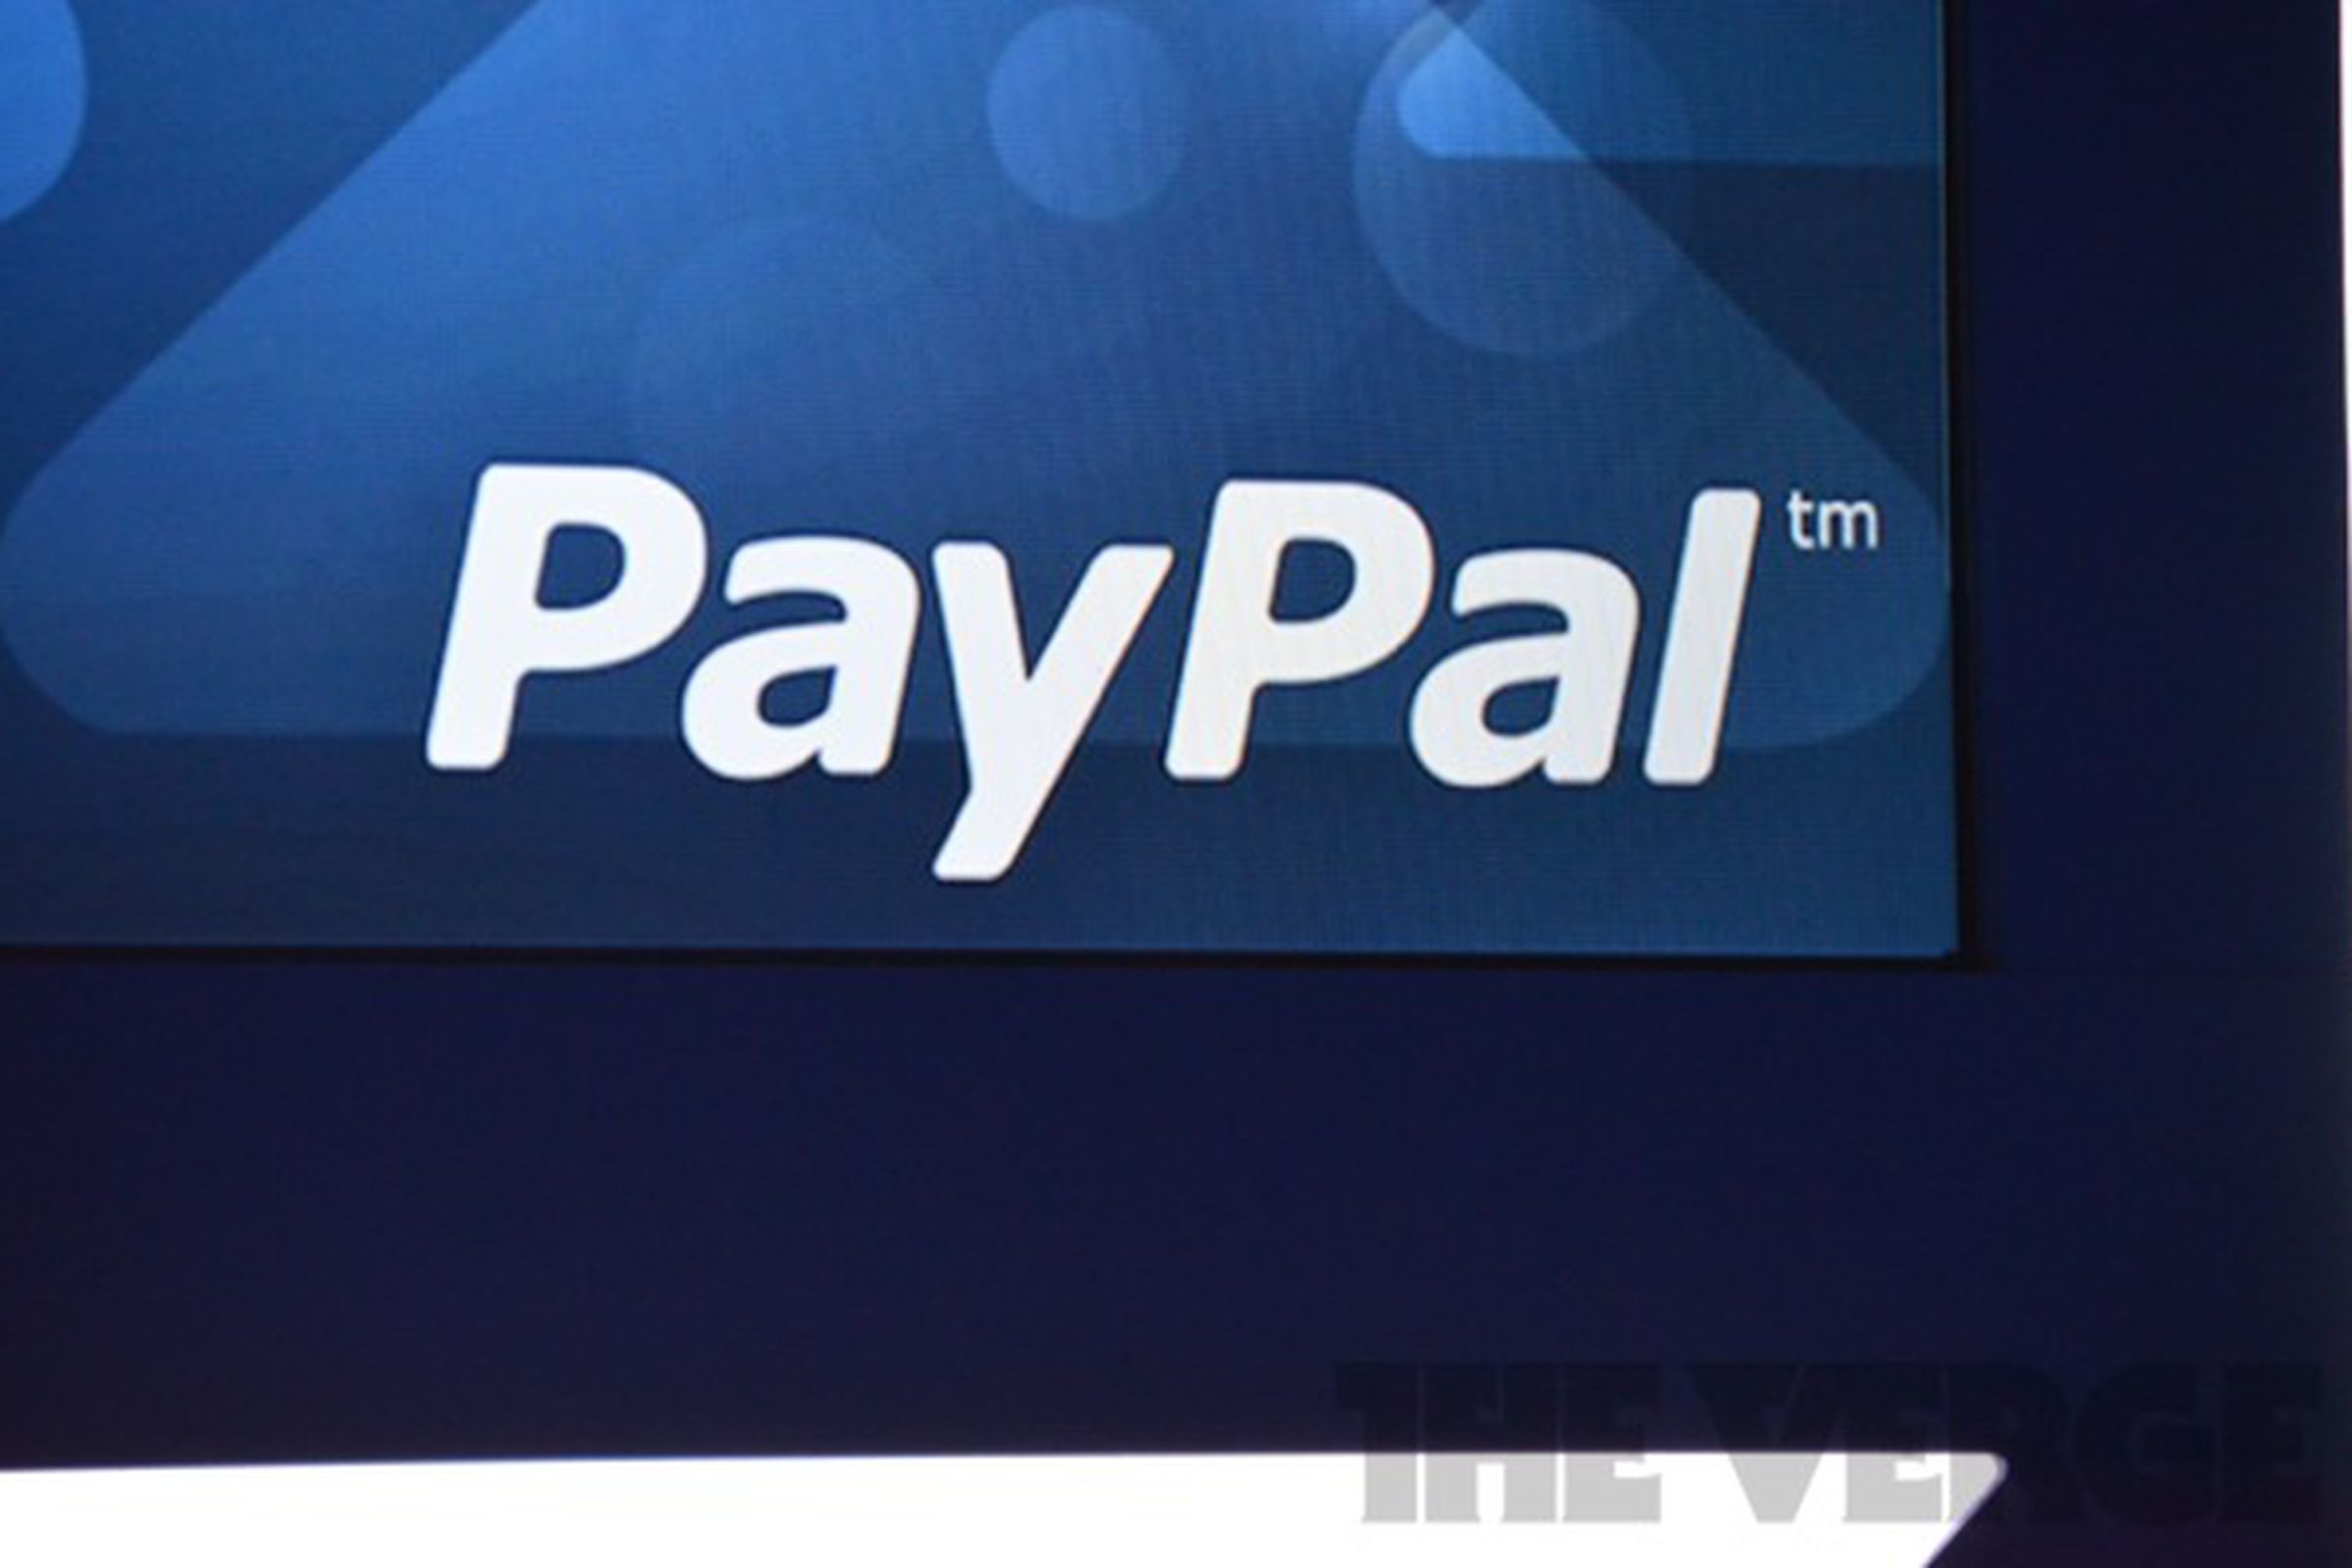 Paypal logo event